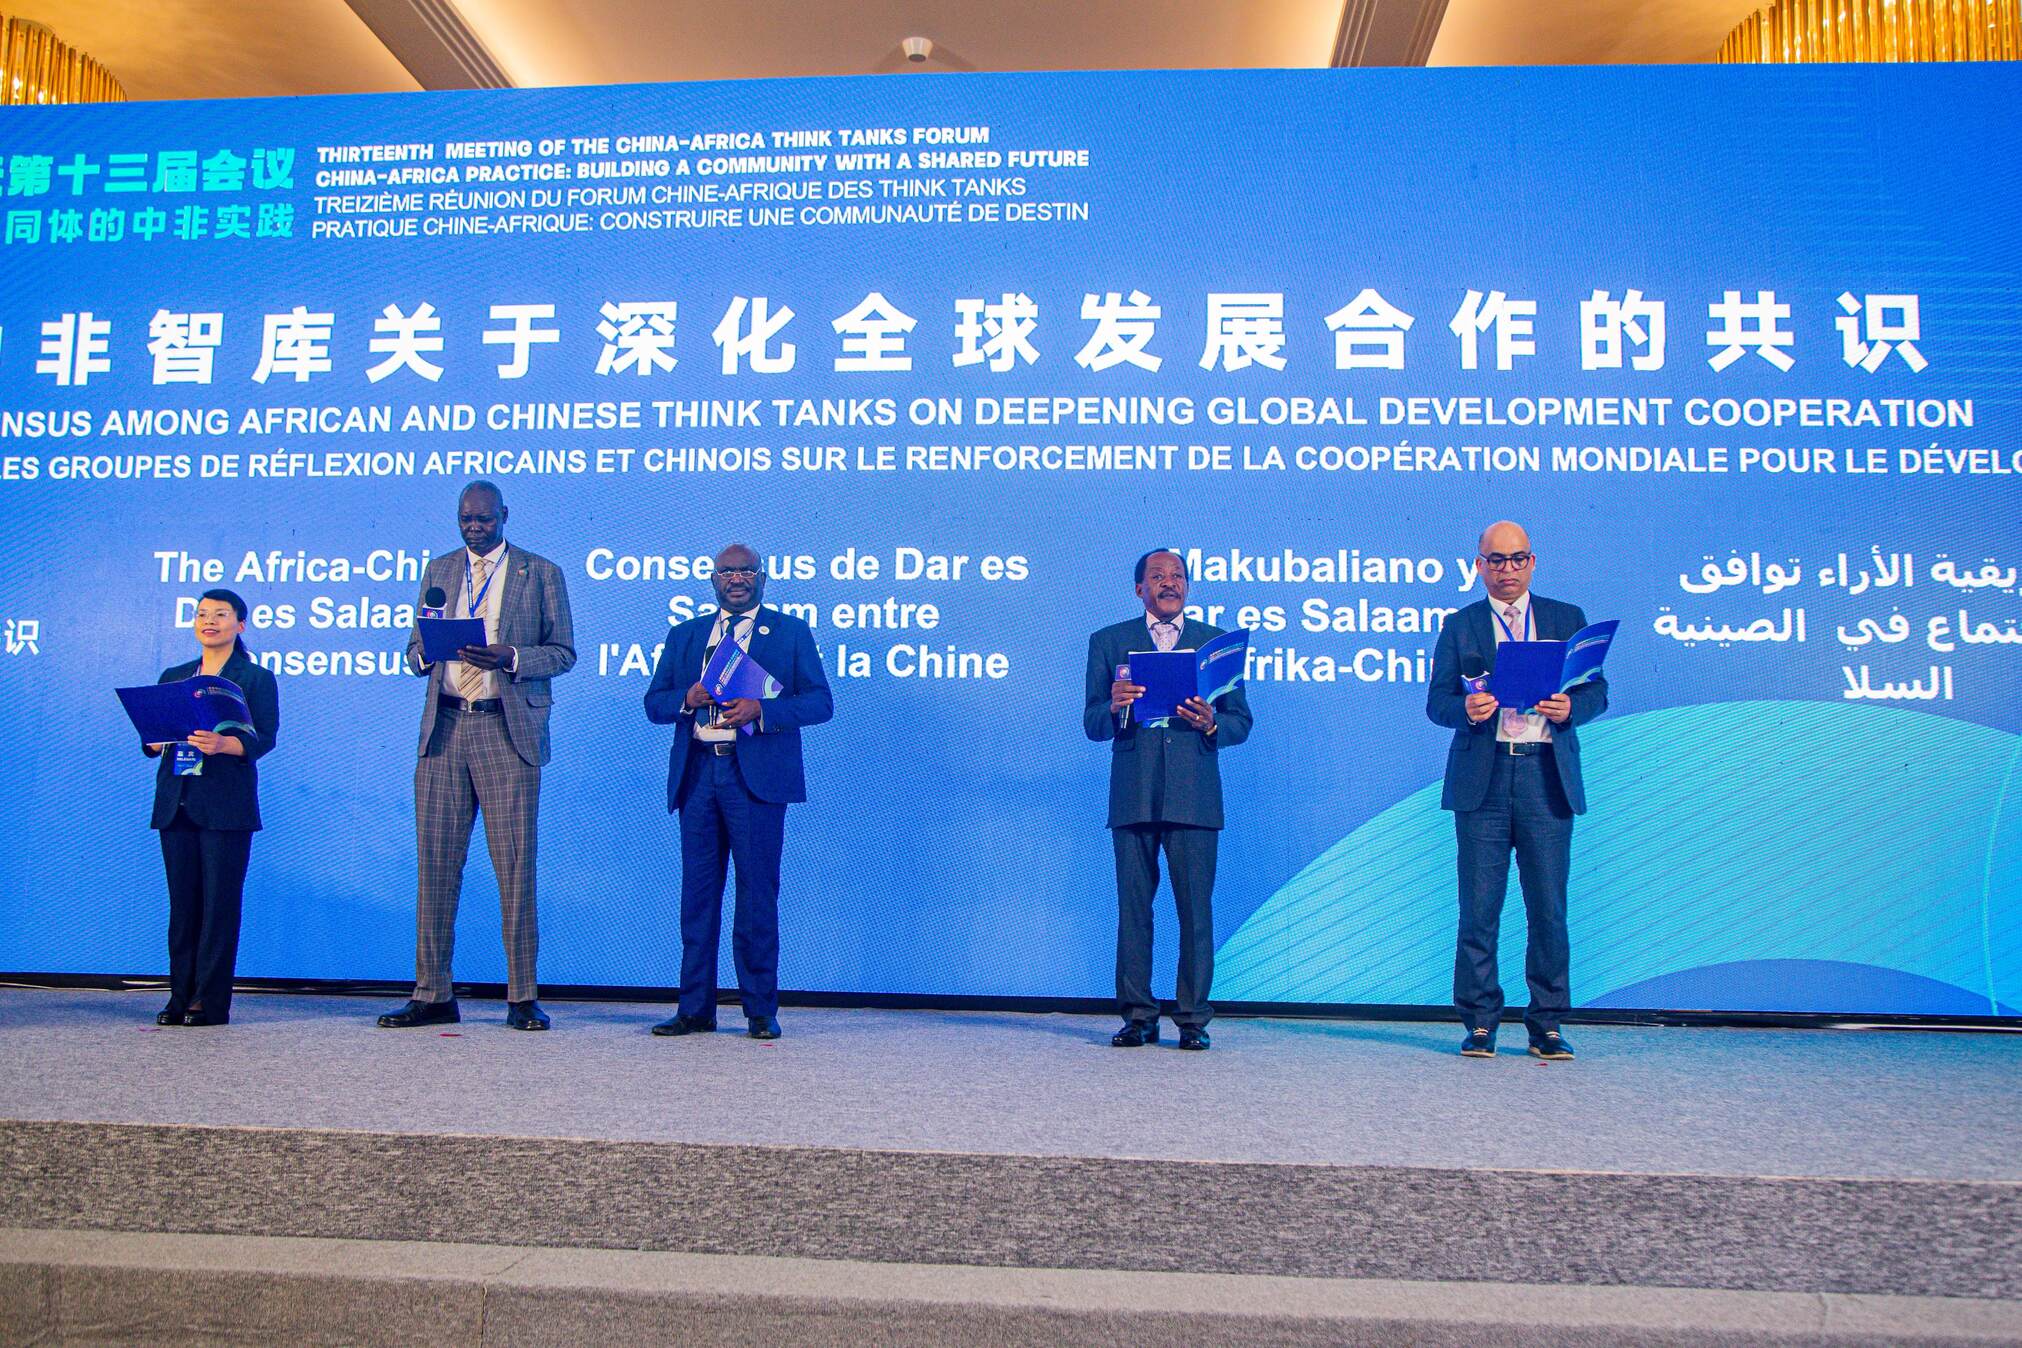 The-Africa-China-Dar-es-Salaam-Consensus-was-launched-in-Chinese-English-French-Swahili-and-Arabic-